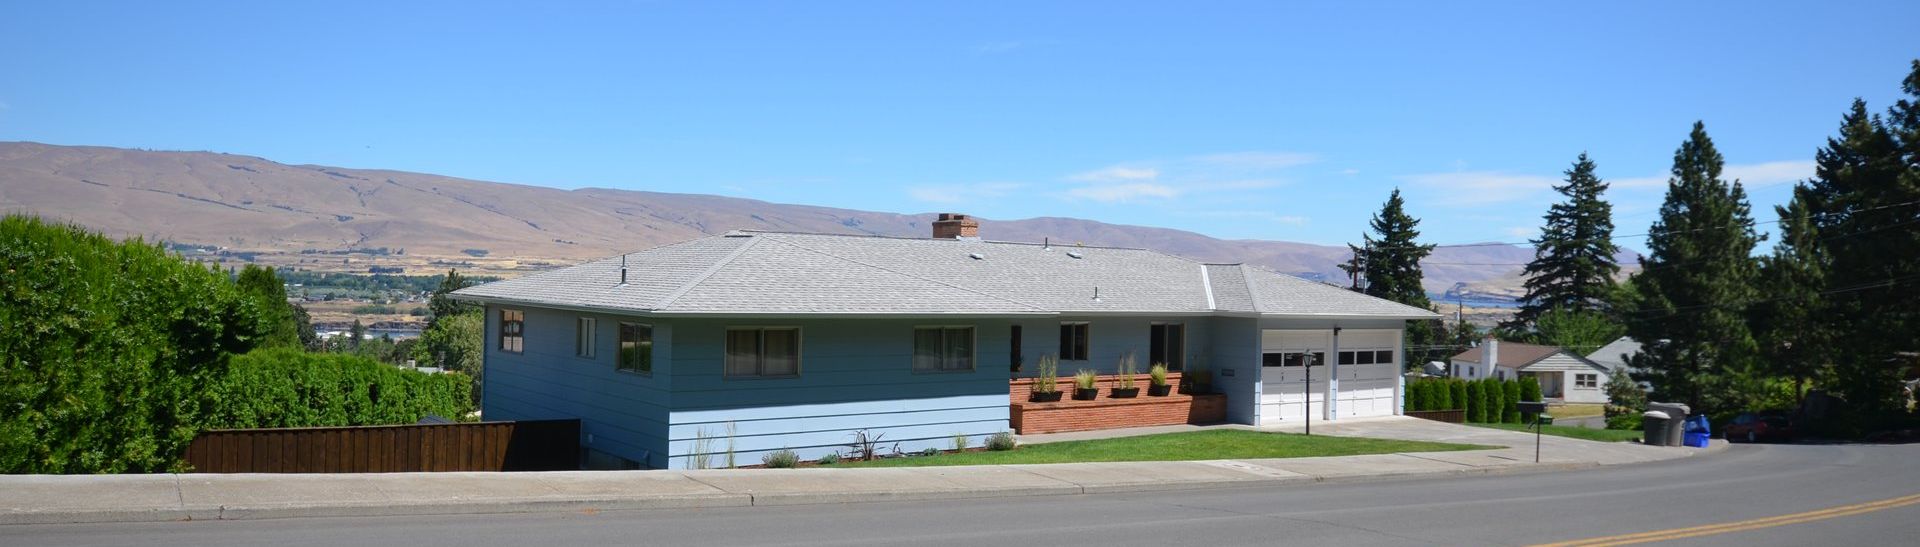 1707 Lincoln Way The Dalles Price Drop